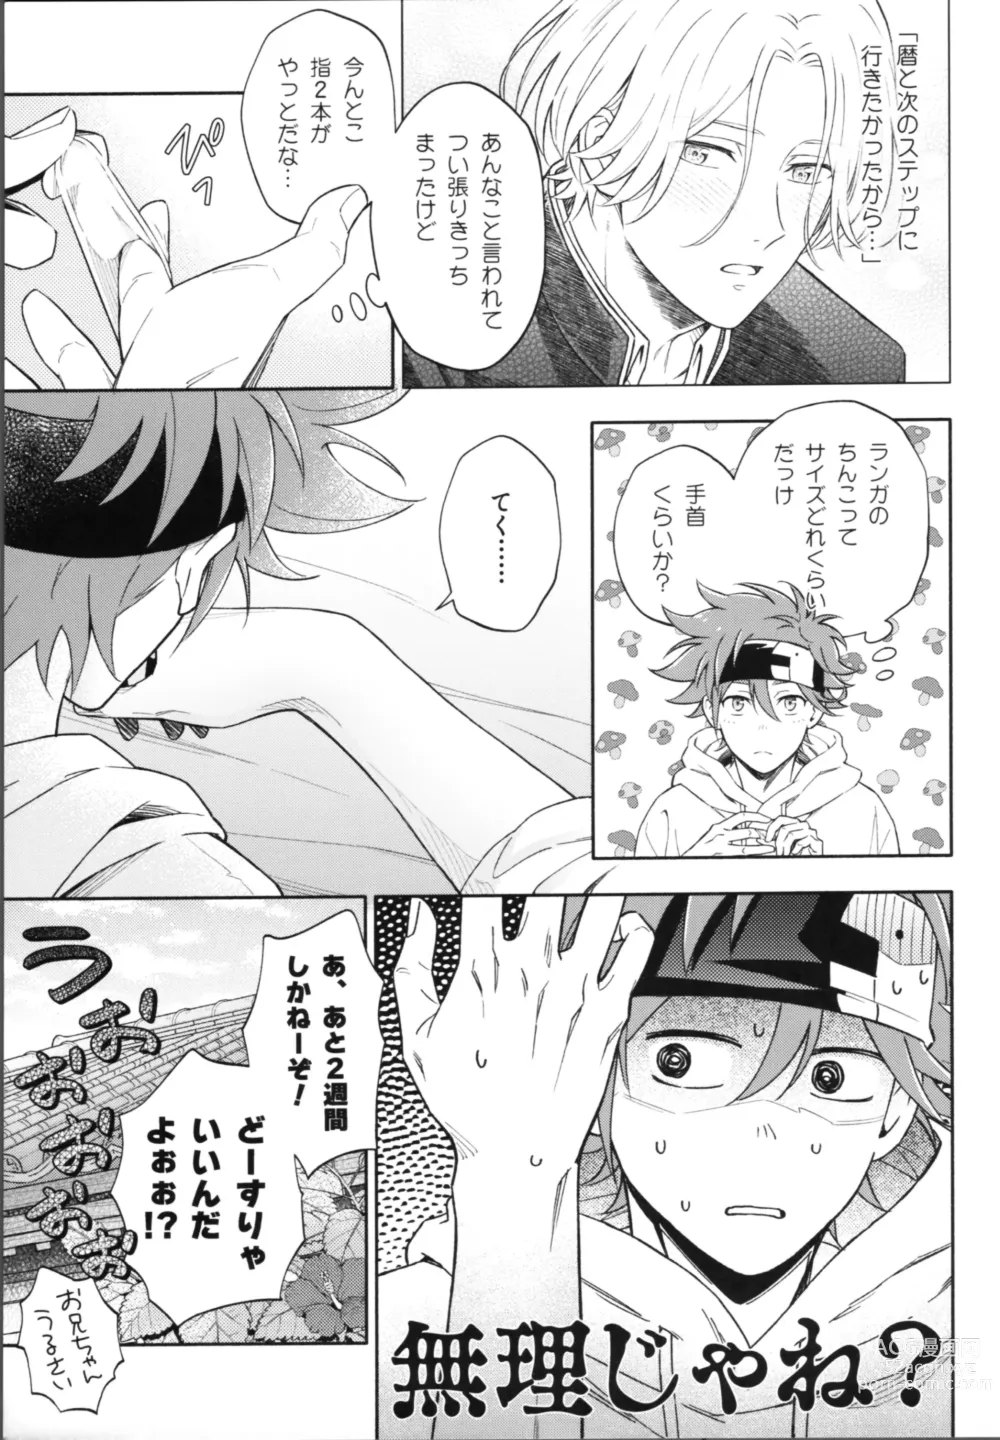 Page 12 of doujinshi One Night Infinity